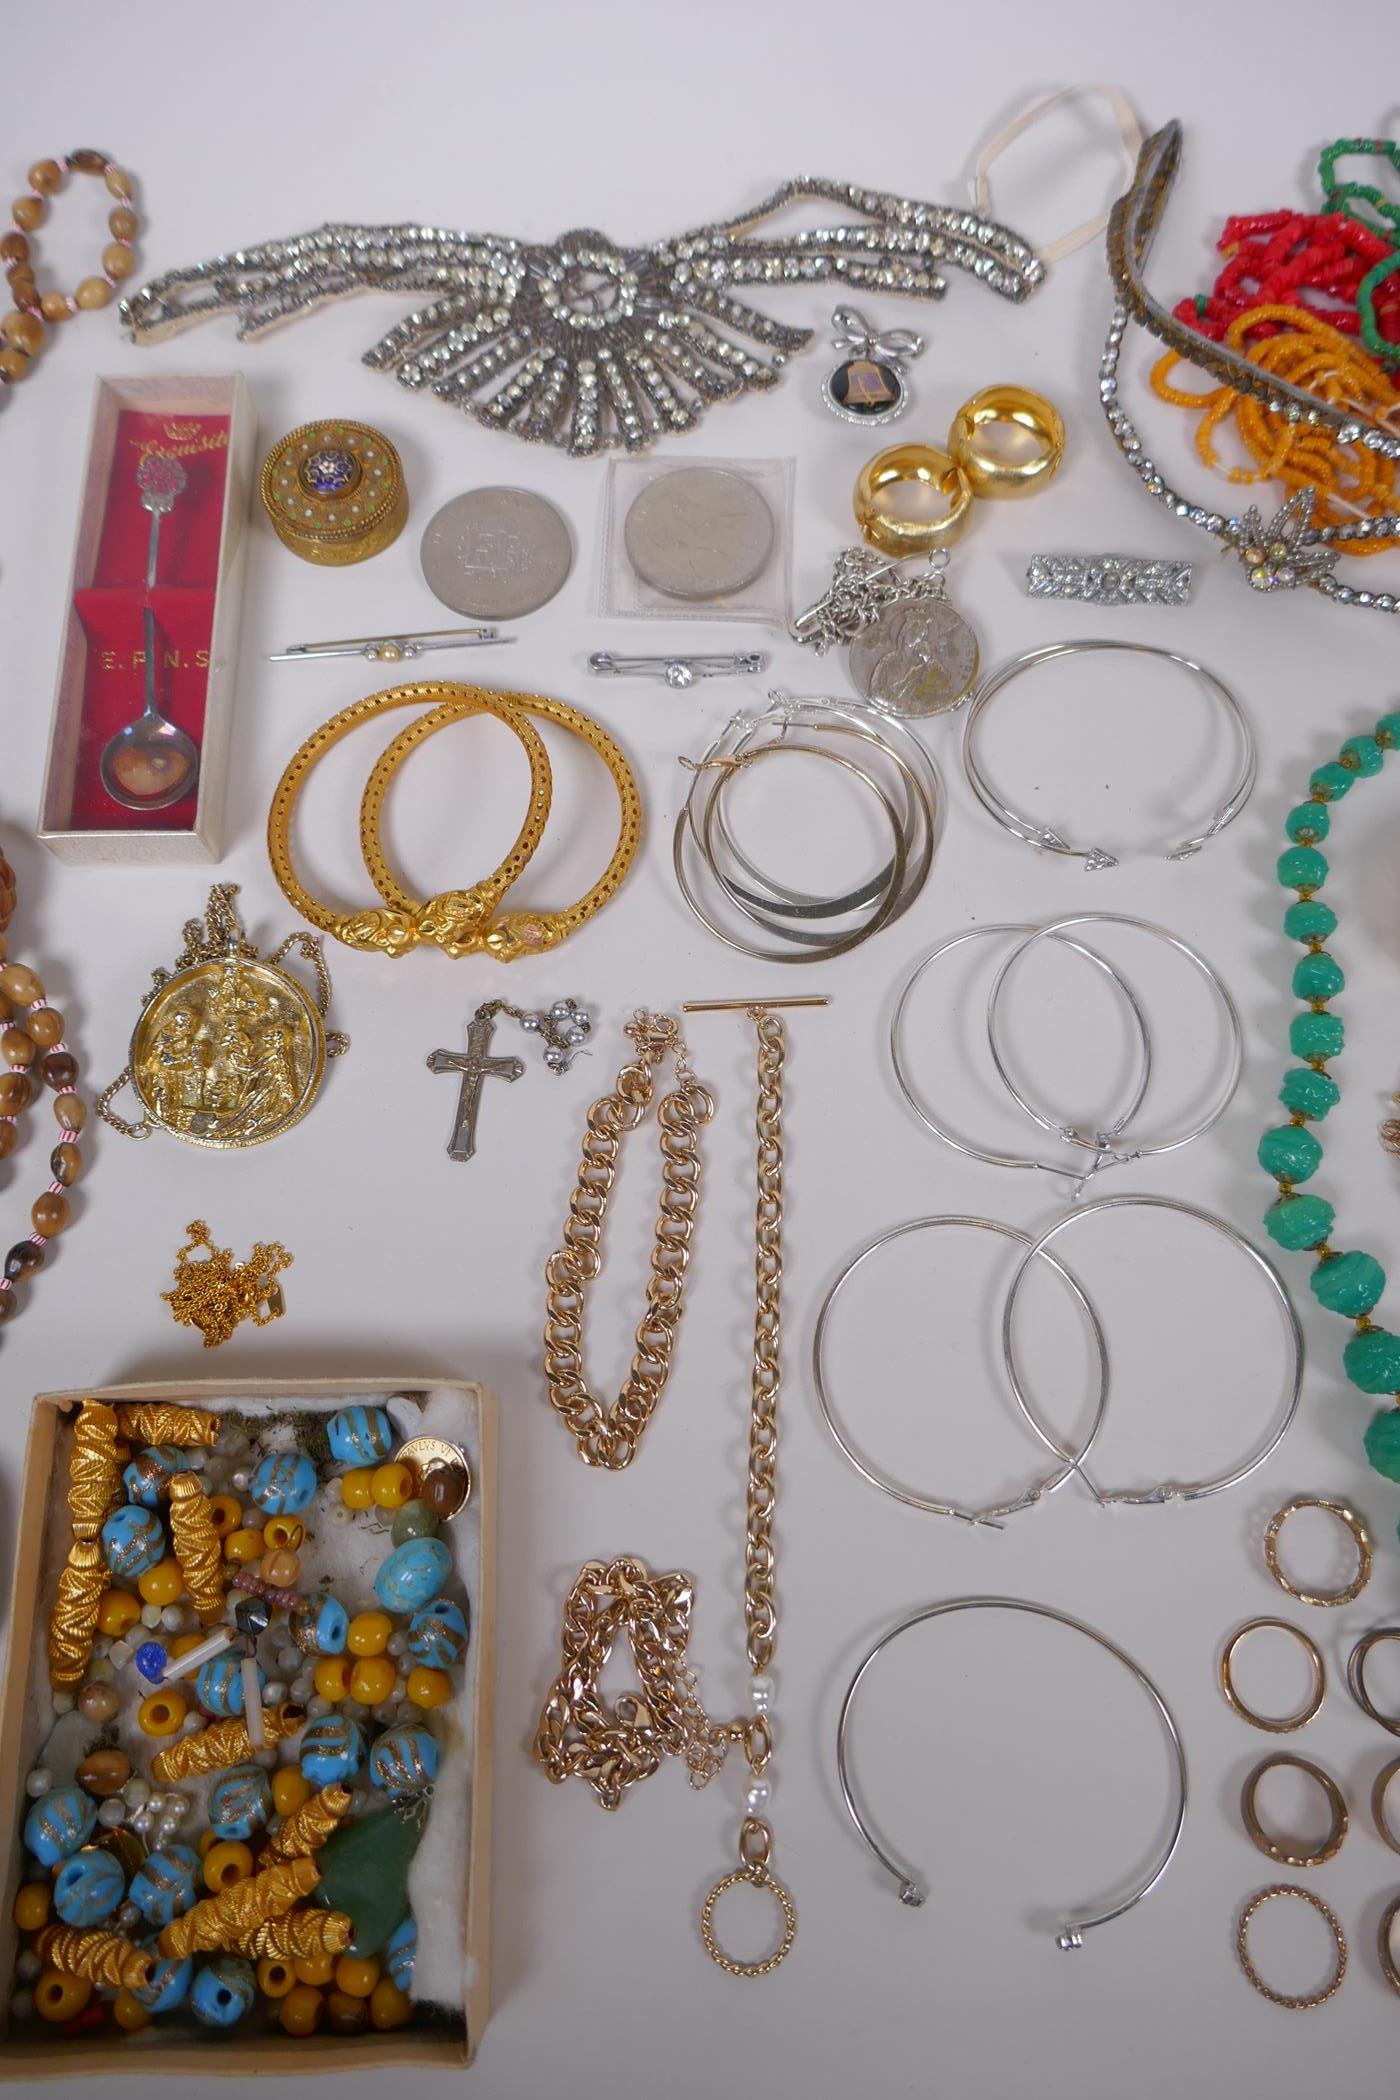 A quantity of vintage costume jewellery including a tiara, bangles, necklaces etc, together with a - Image 7 of 9